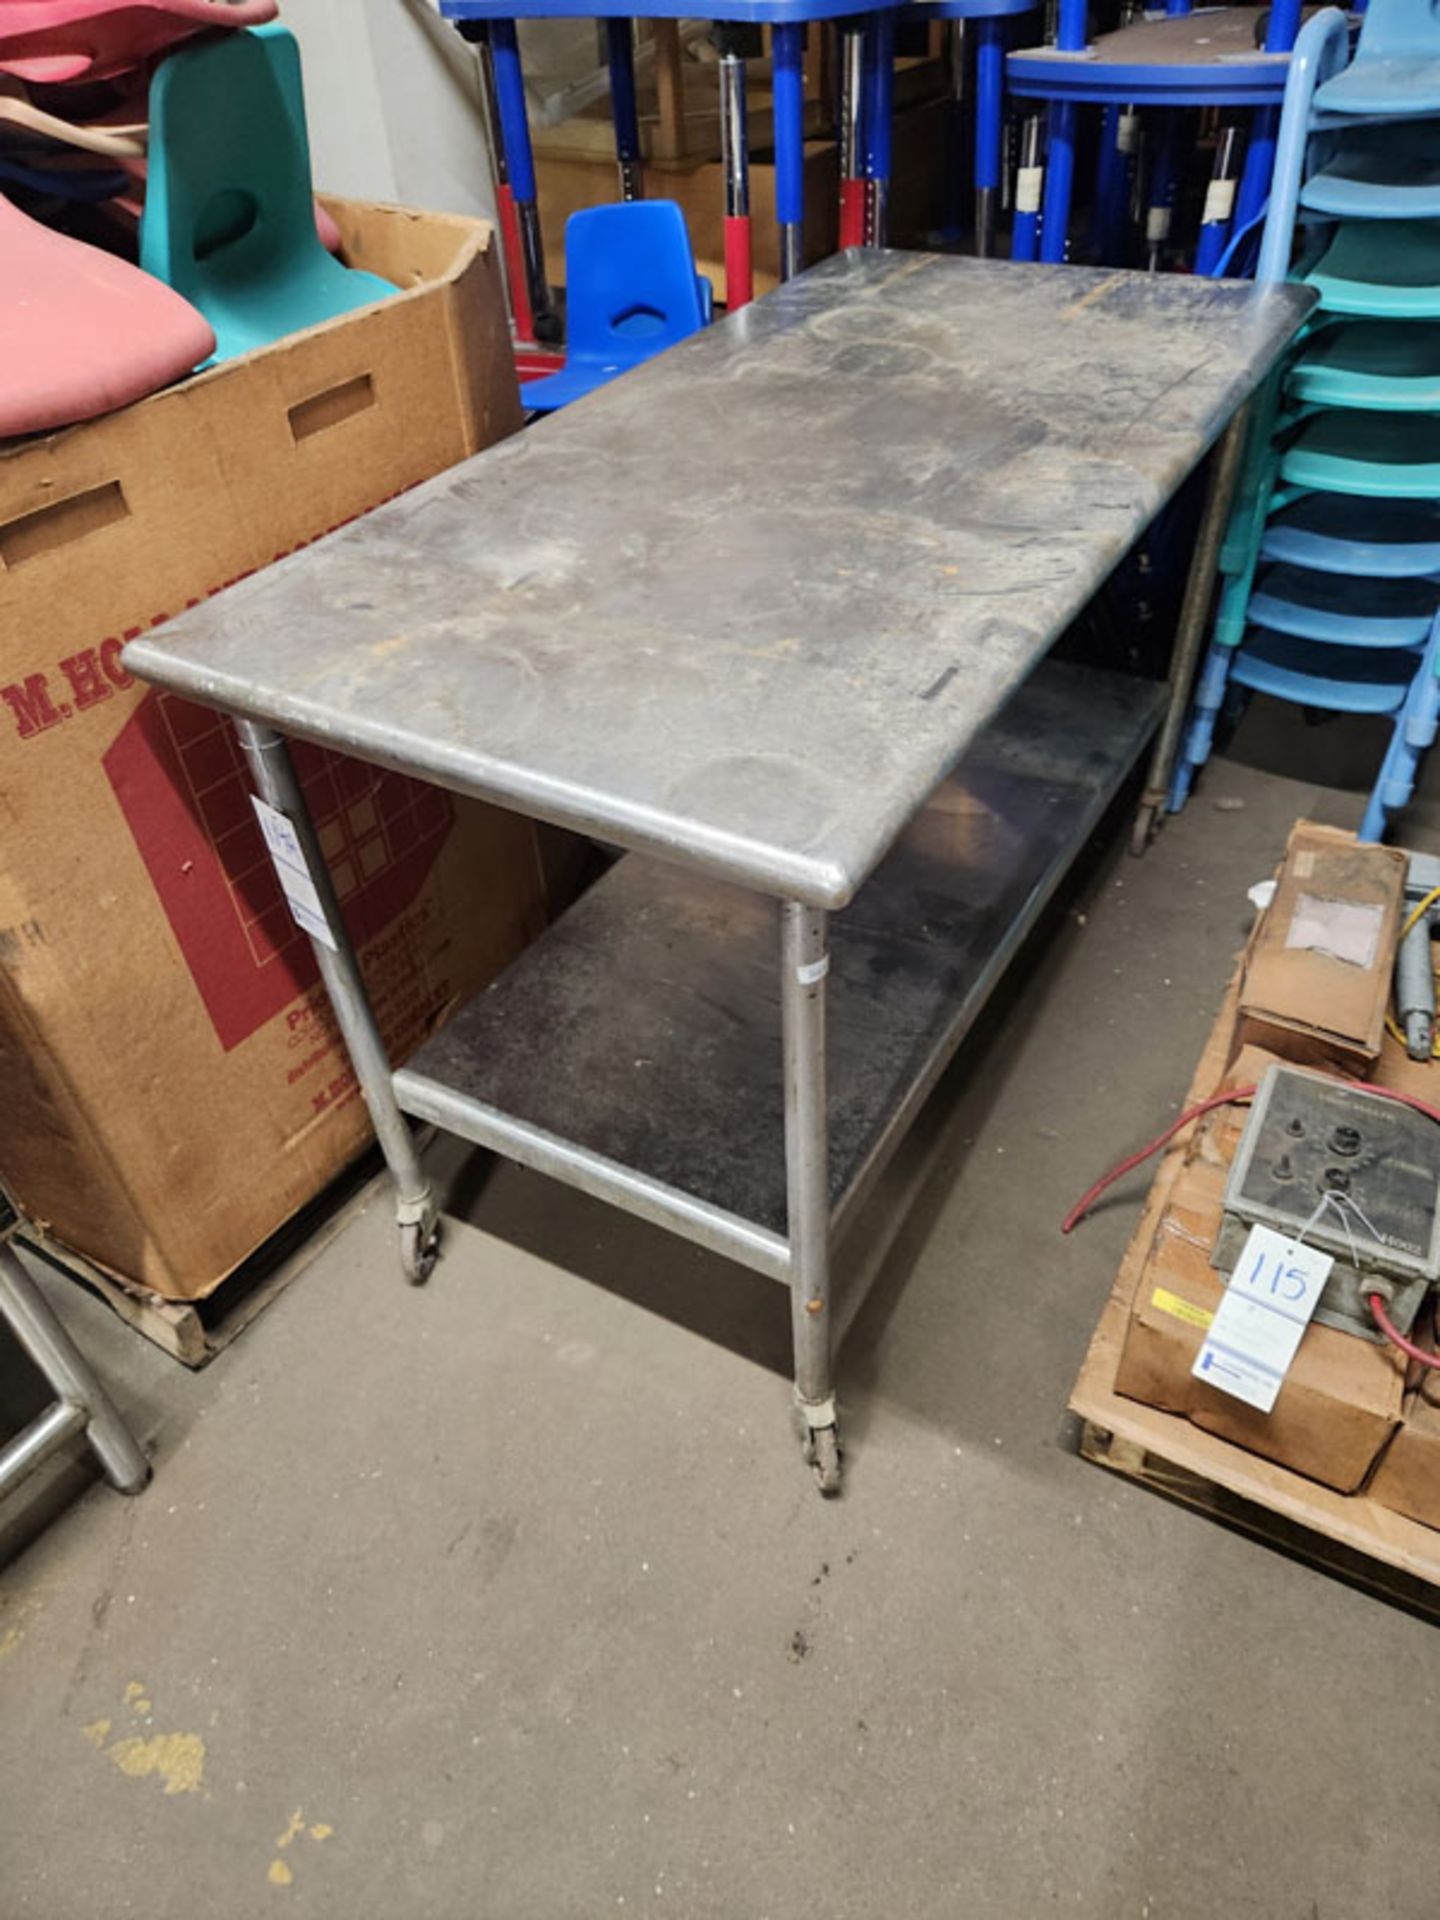 STAINLESS STEEL PREP TABLE 60"x30"x38" - USED AS A SHOP TABLE - Image 2 of 2